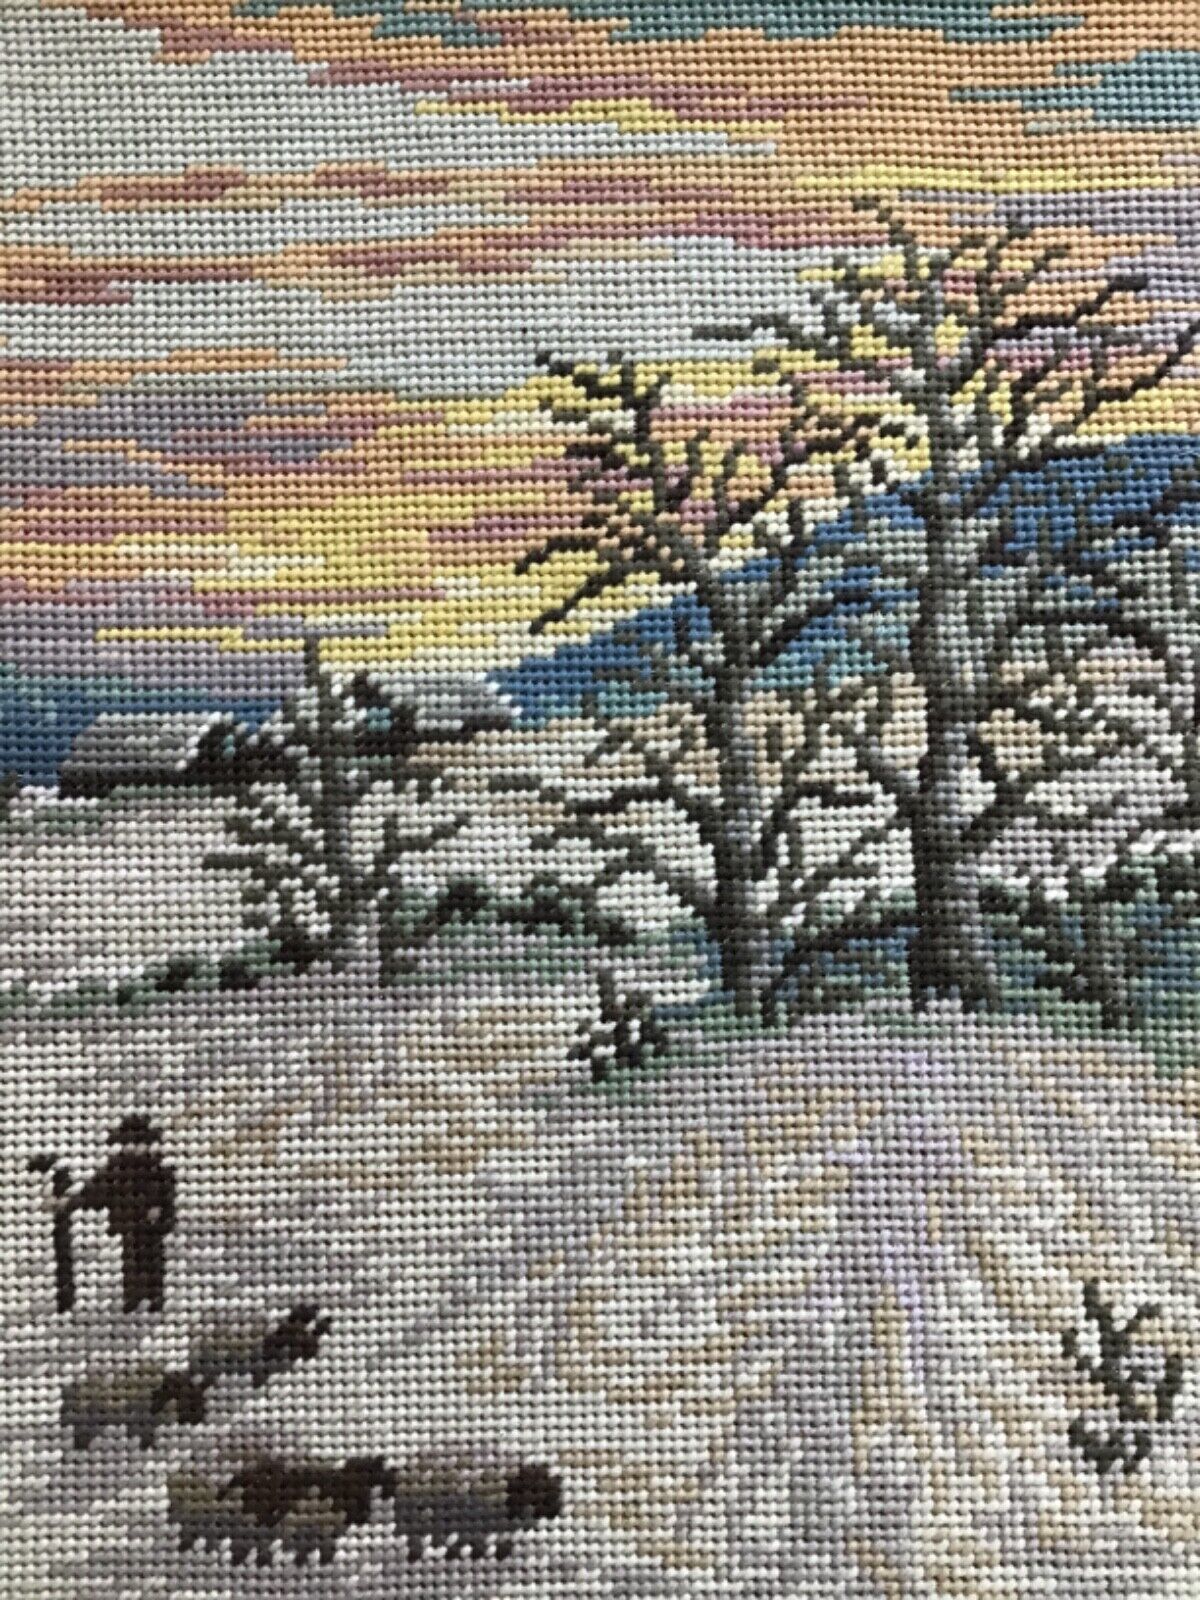 Vintage Completed Unusual Tapestry - Winter Sunset w Shepherd & Sheep 14” x 19”